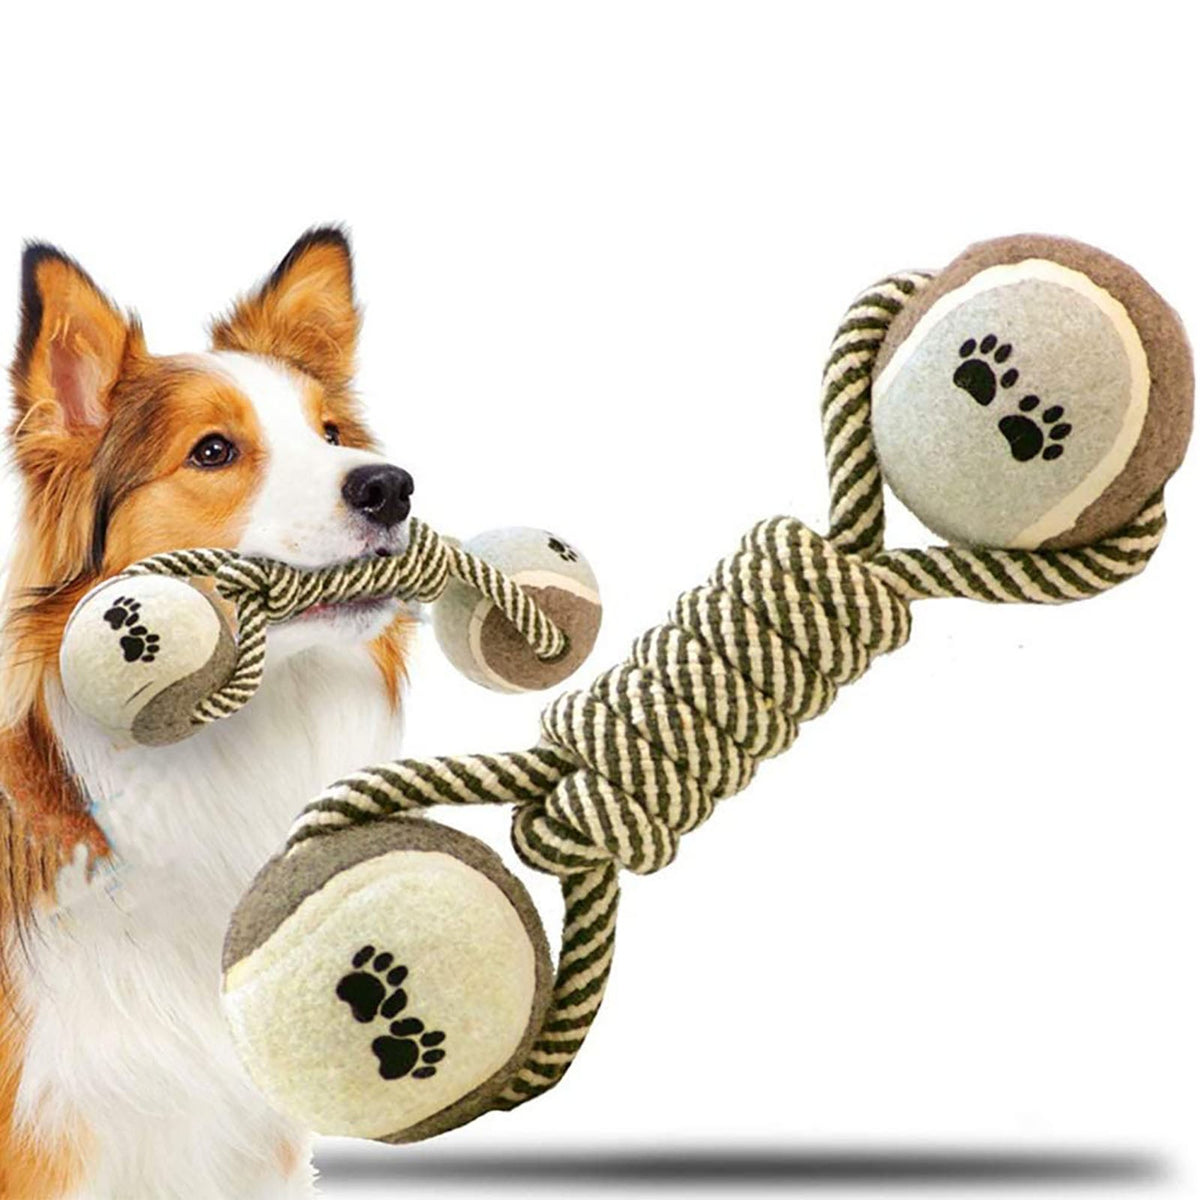 Pet Dog Toys For Large Small Dogs Toy Interactive Cotton Rope Mini Dog Toys Ball For Dogs Accessories